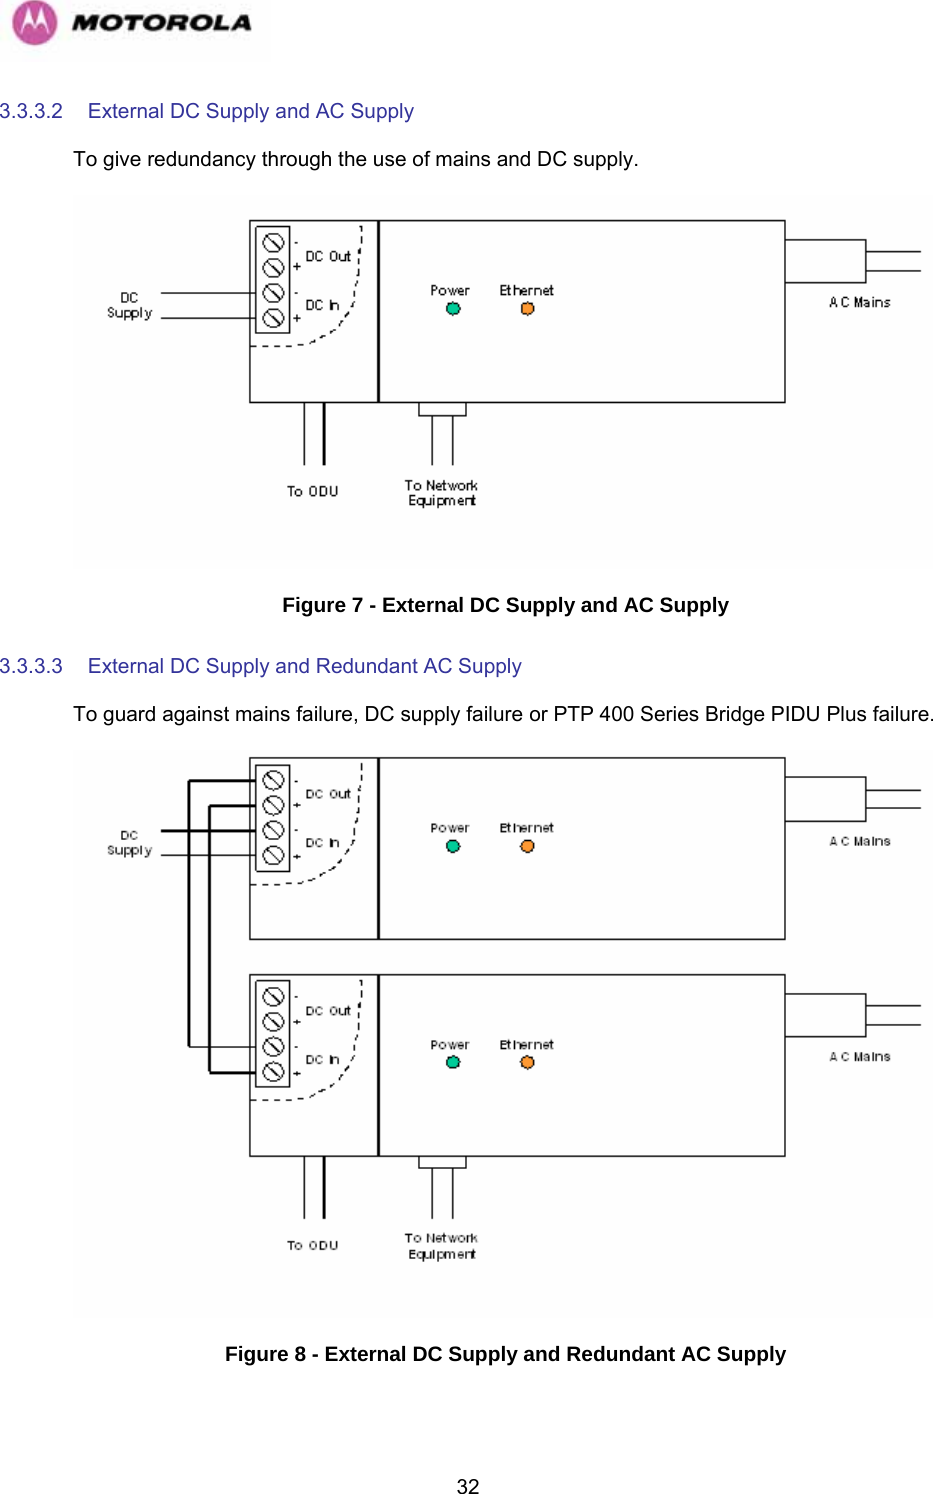   323.3.3.2  External DC Supply and AC Supply To give redundancy through the use of mains and DC supply.  Figure 7 - External DC Supply and AC Supply 3.3.3.3  External DC Supply and Redundant AC Supply To guard against mains failure, DC supply failure or PTP 400 Series Bridge PIDU Plus failure.  Figure 8 - External DC Supply and Redundant AC Supply 